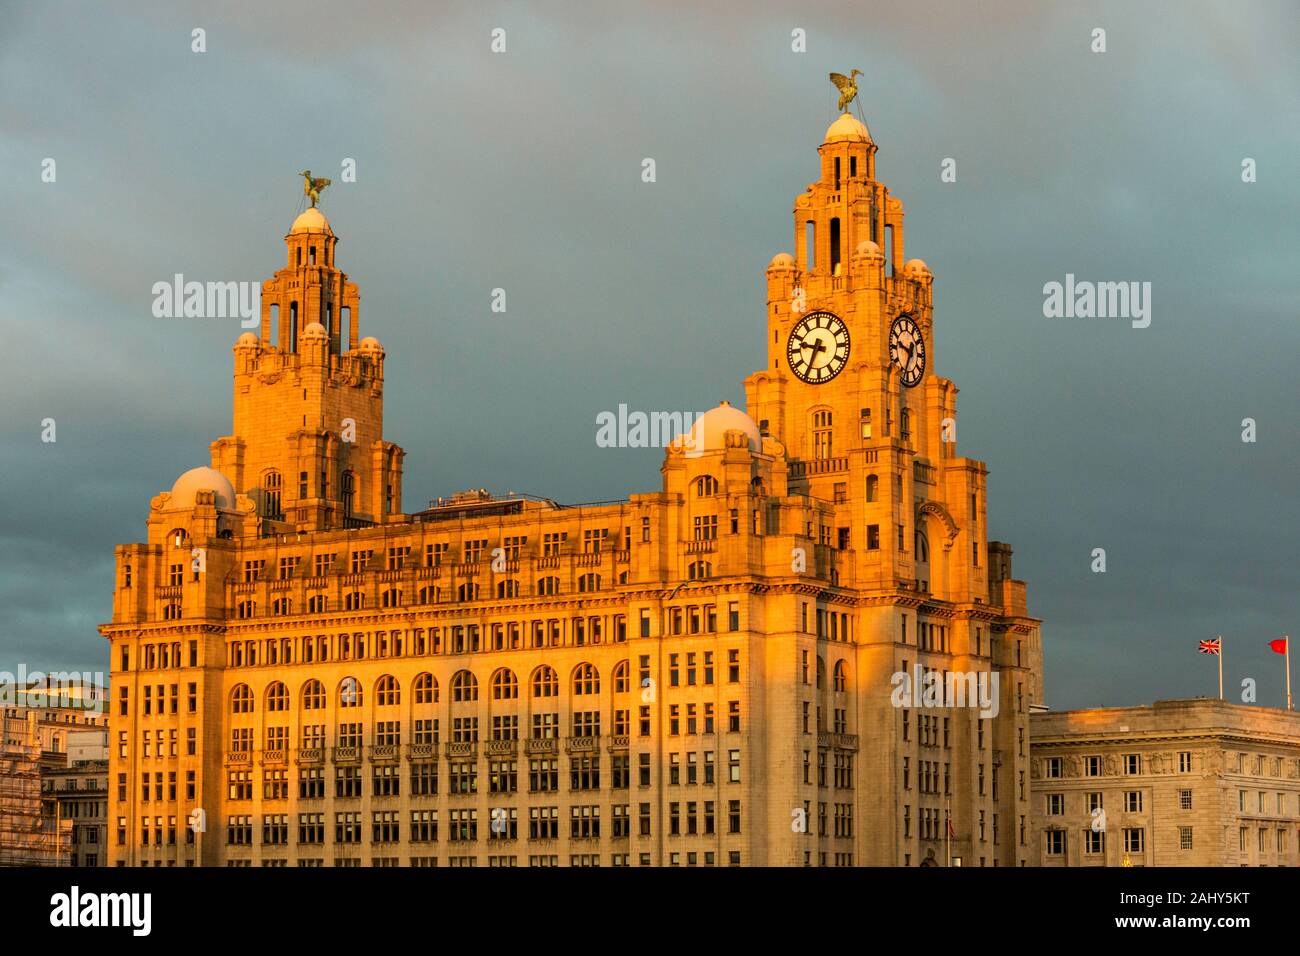 The Royal Liver Building (1911) is a Grade I listed building on Pier Head, Liverpool, England, UK Stock Photo